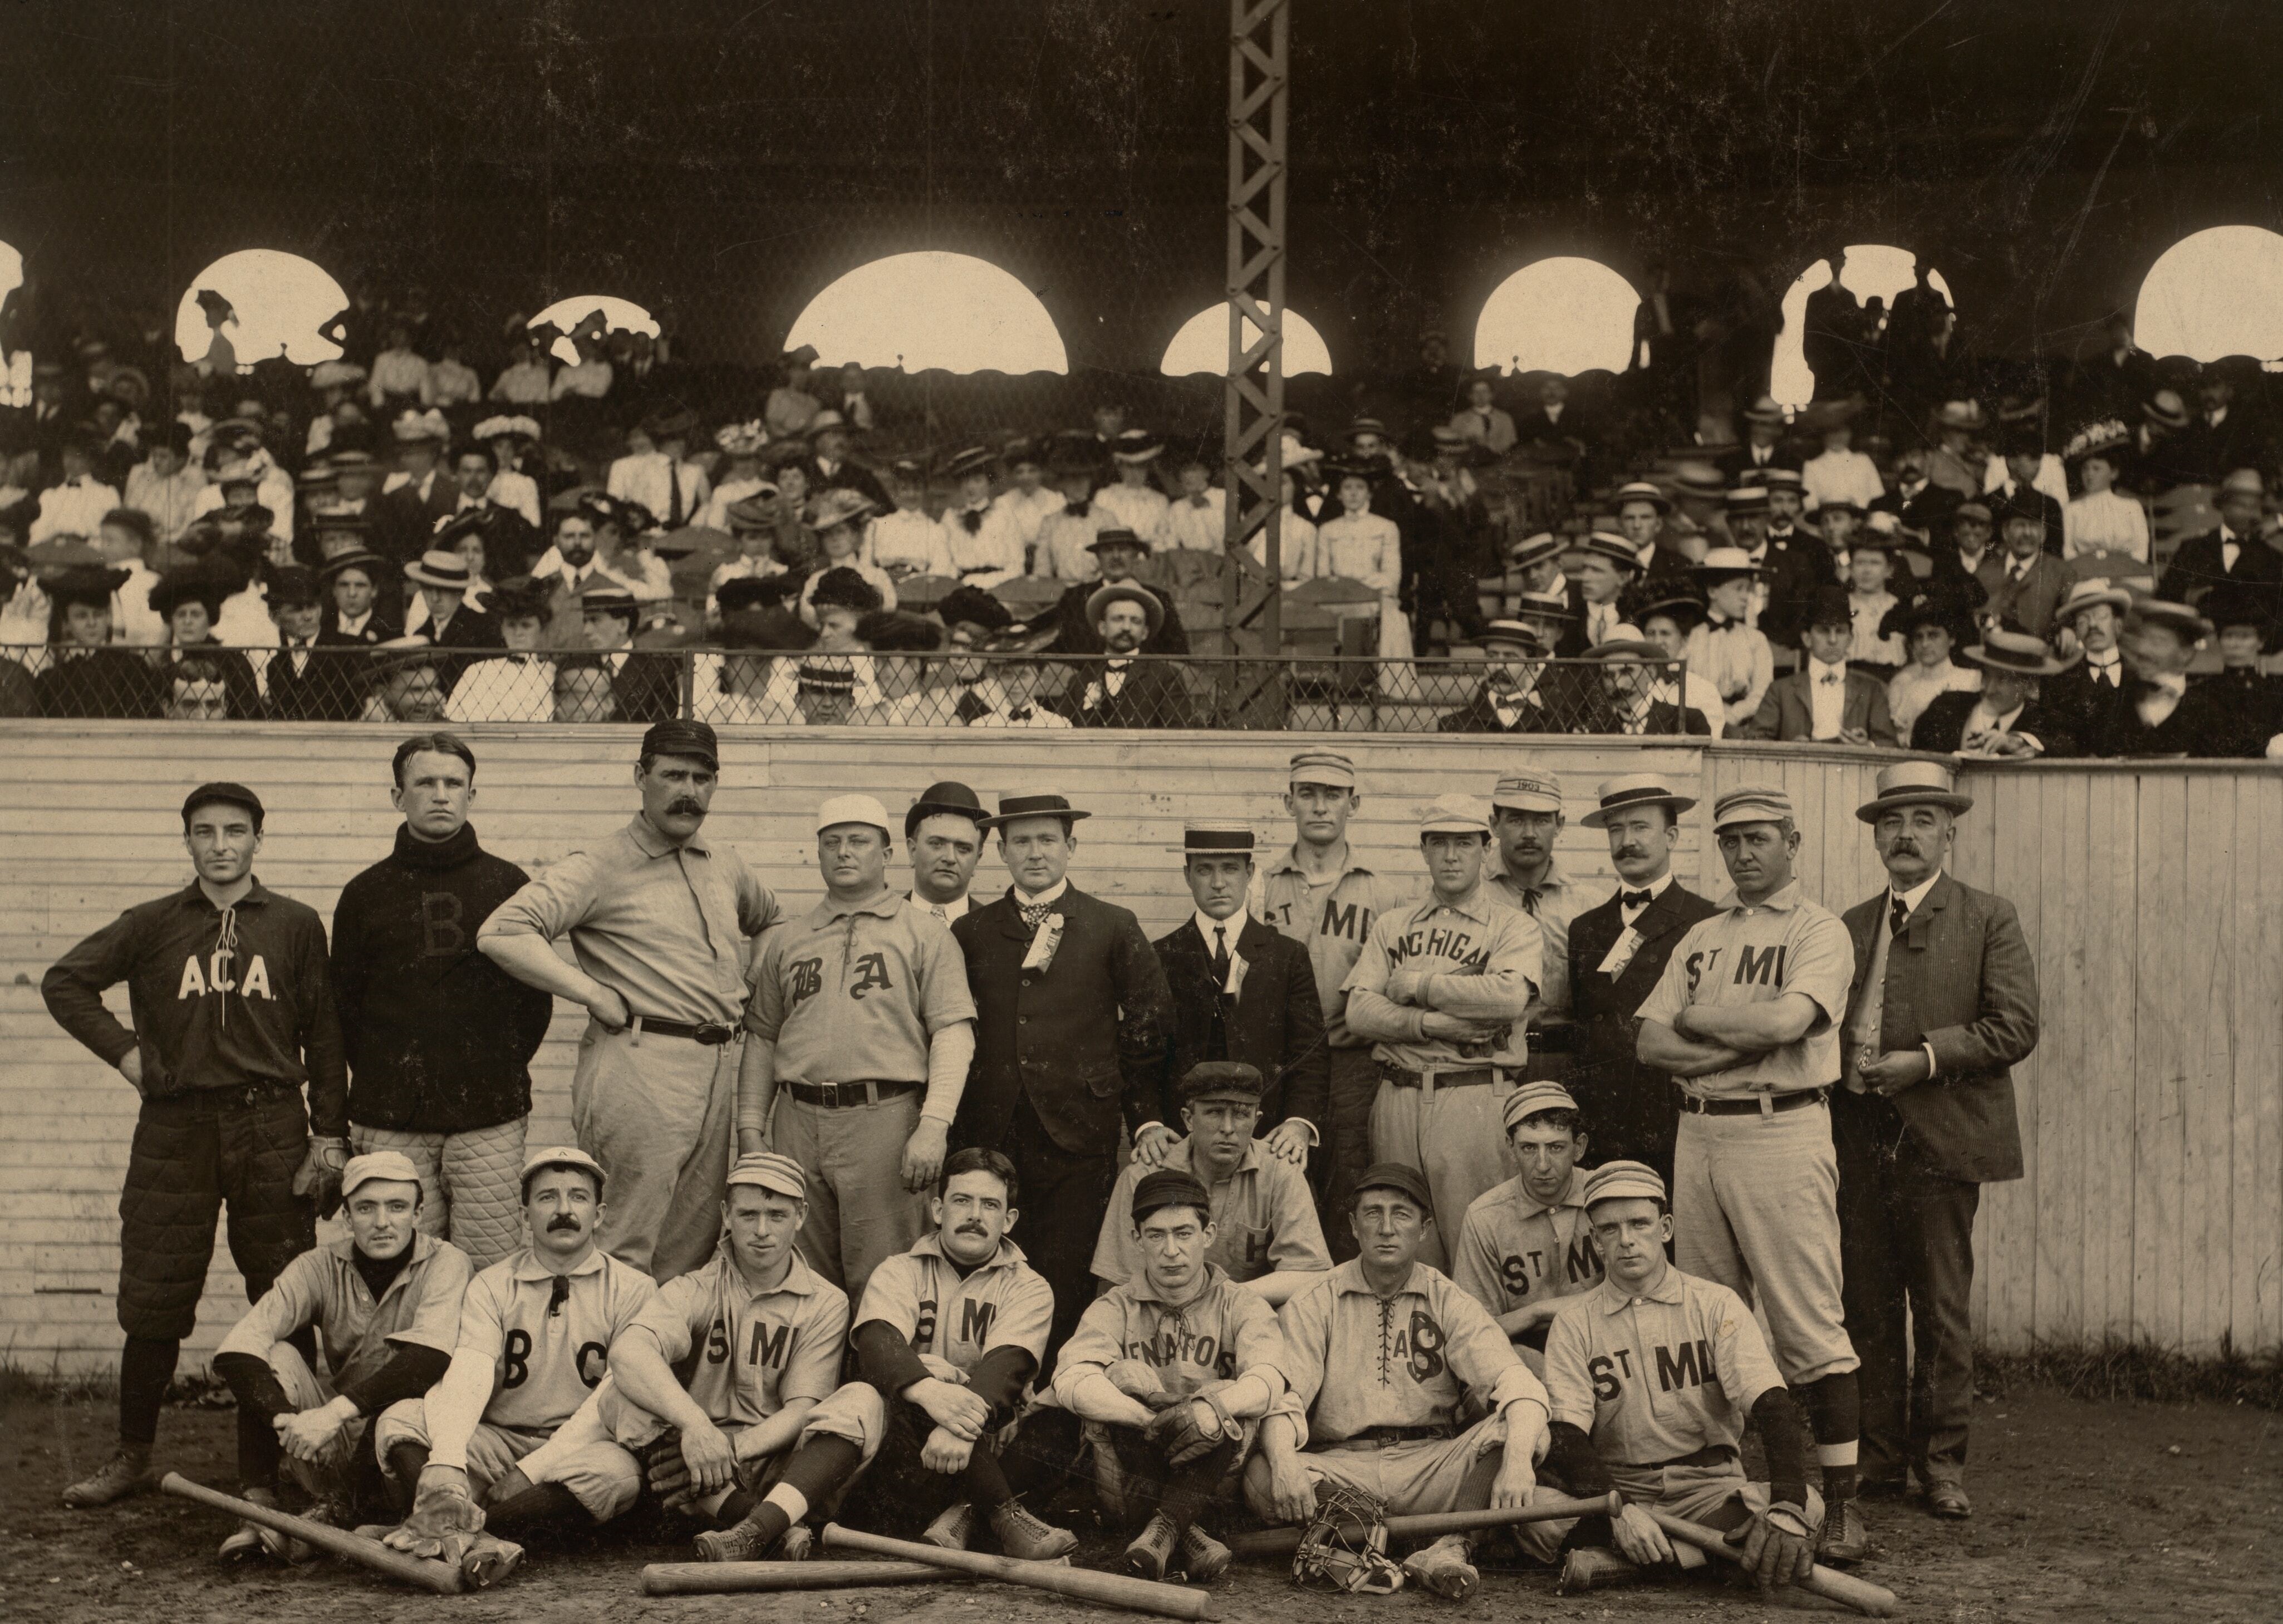 Black and white image of a baseball team